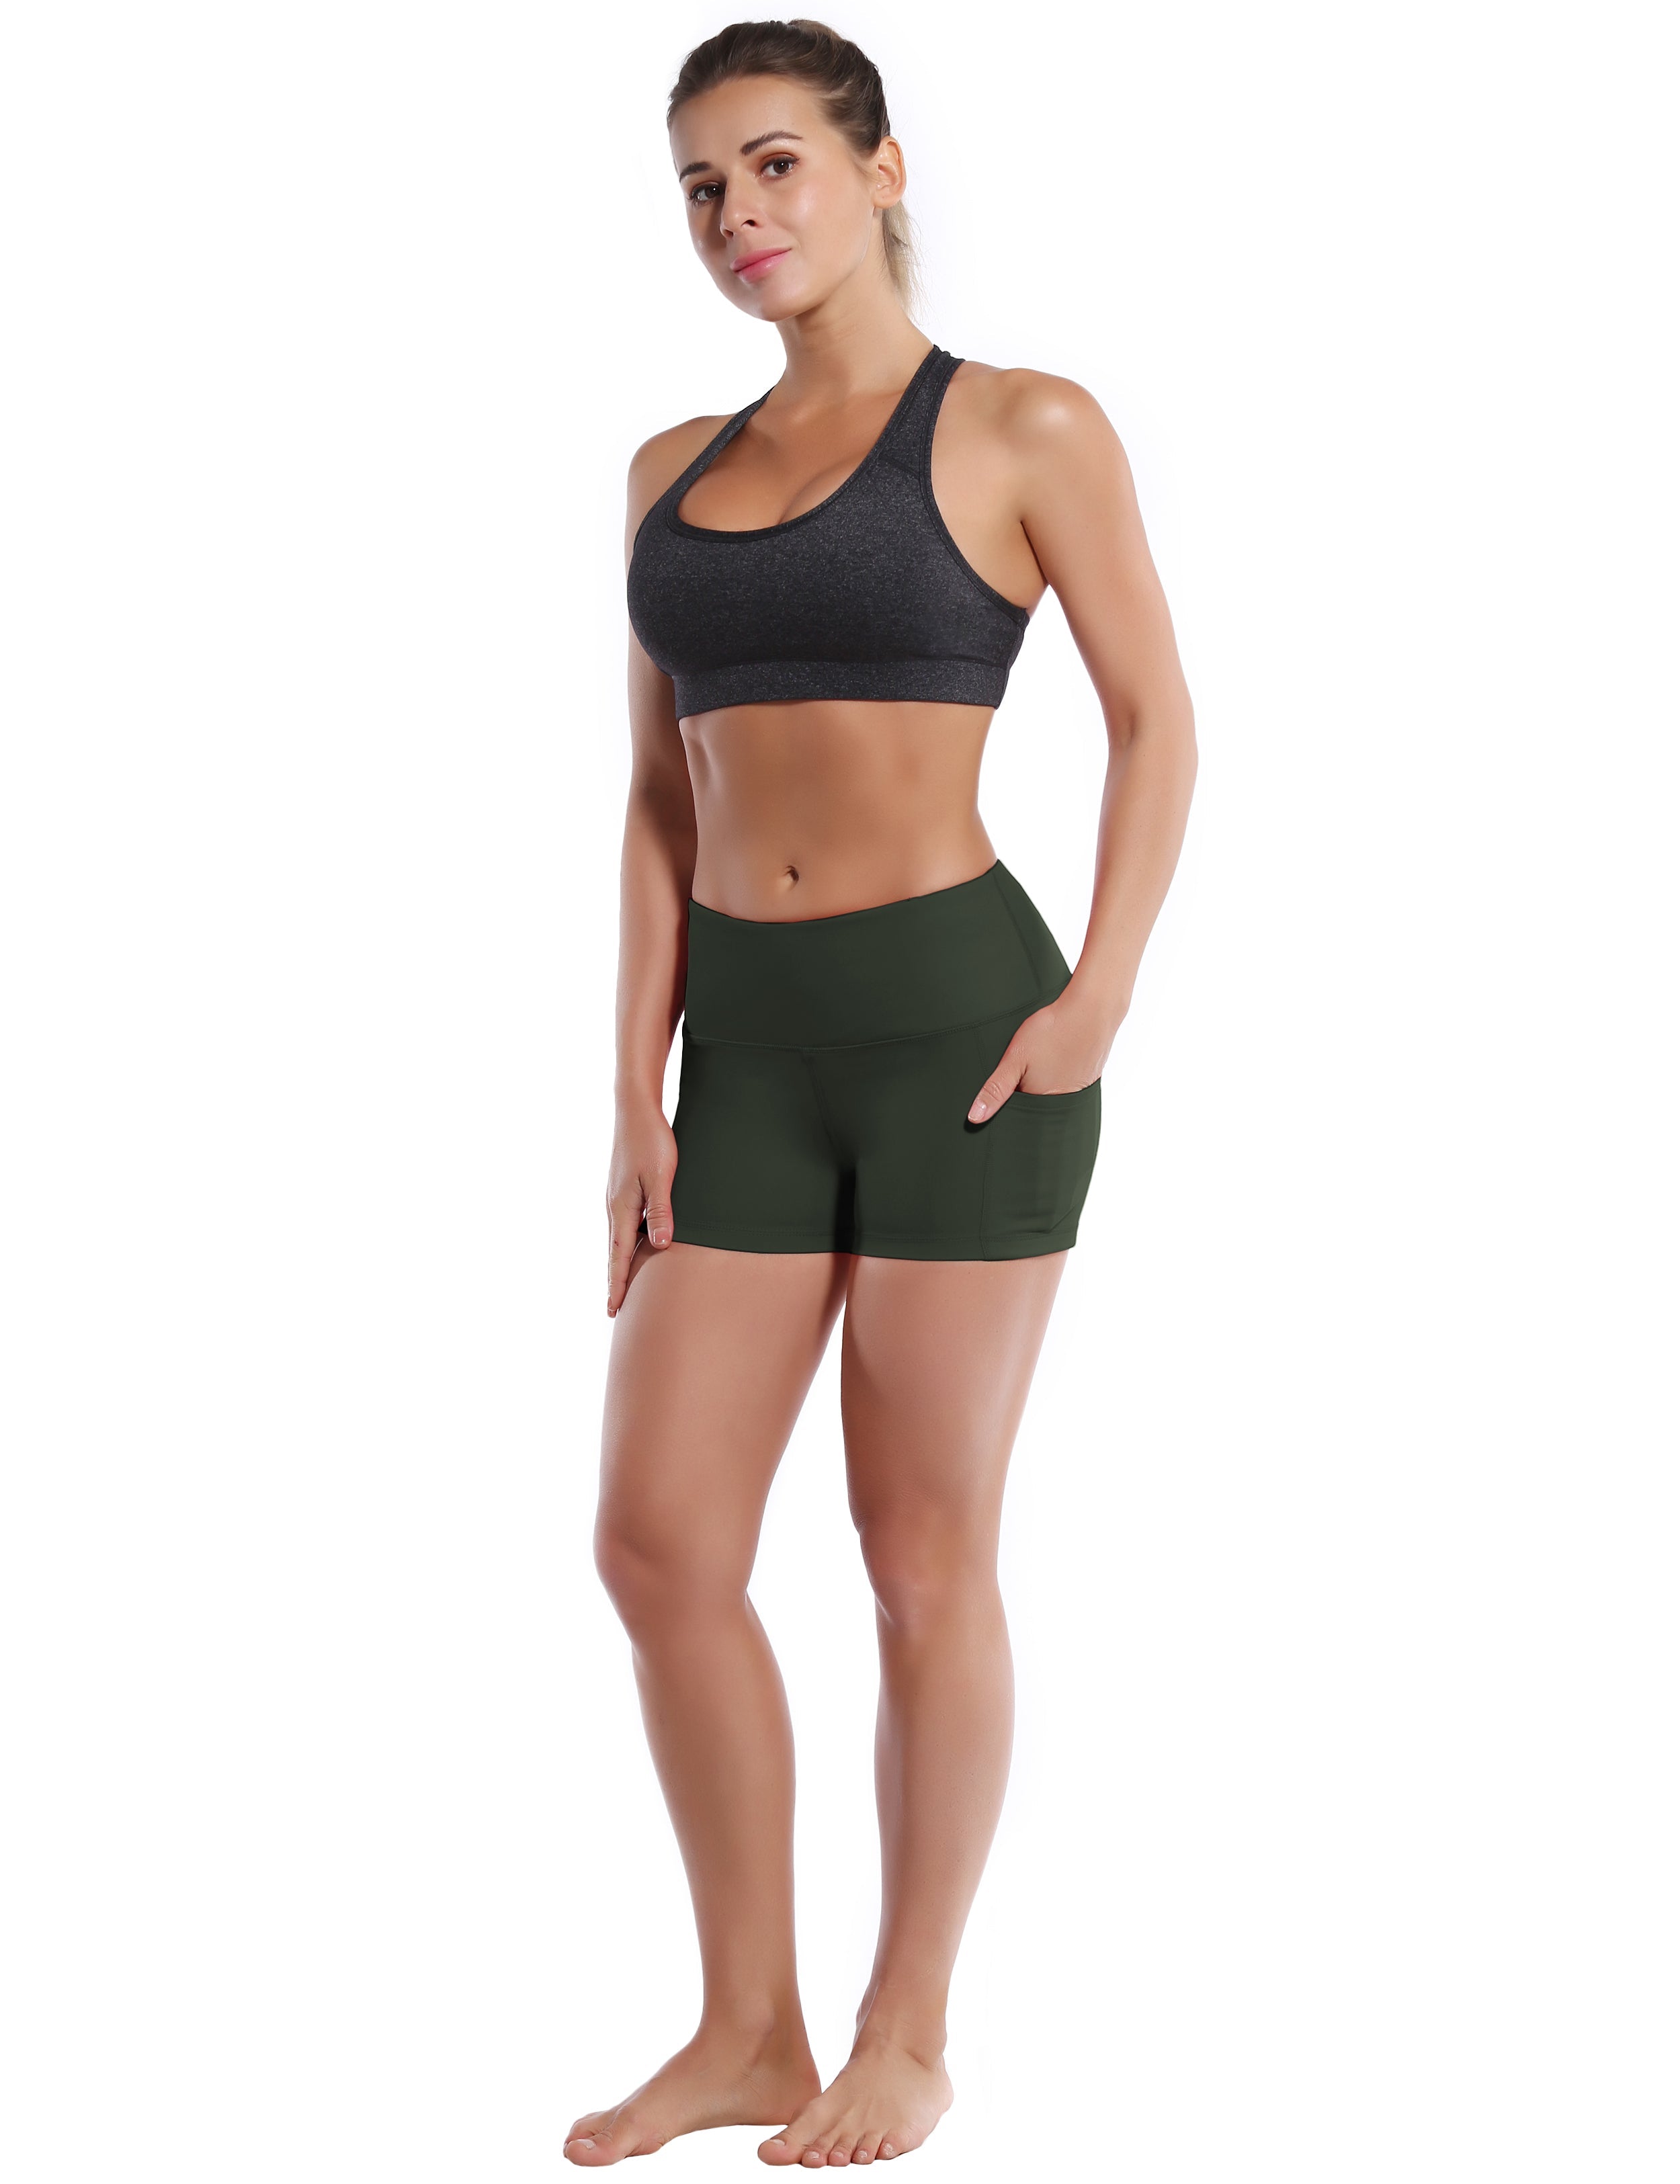 2.5" Side Pockets Golf Shorts olivegray Sleek, soft, smooth and totally comfortable: our newest sexy style is here. Softest-ever fabric High elasticity High density 4-way stretch Fabric doesn't attract lint easily No see-through Moisture-wicking Machine wash 78% Polyester, 22% Spandex